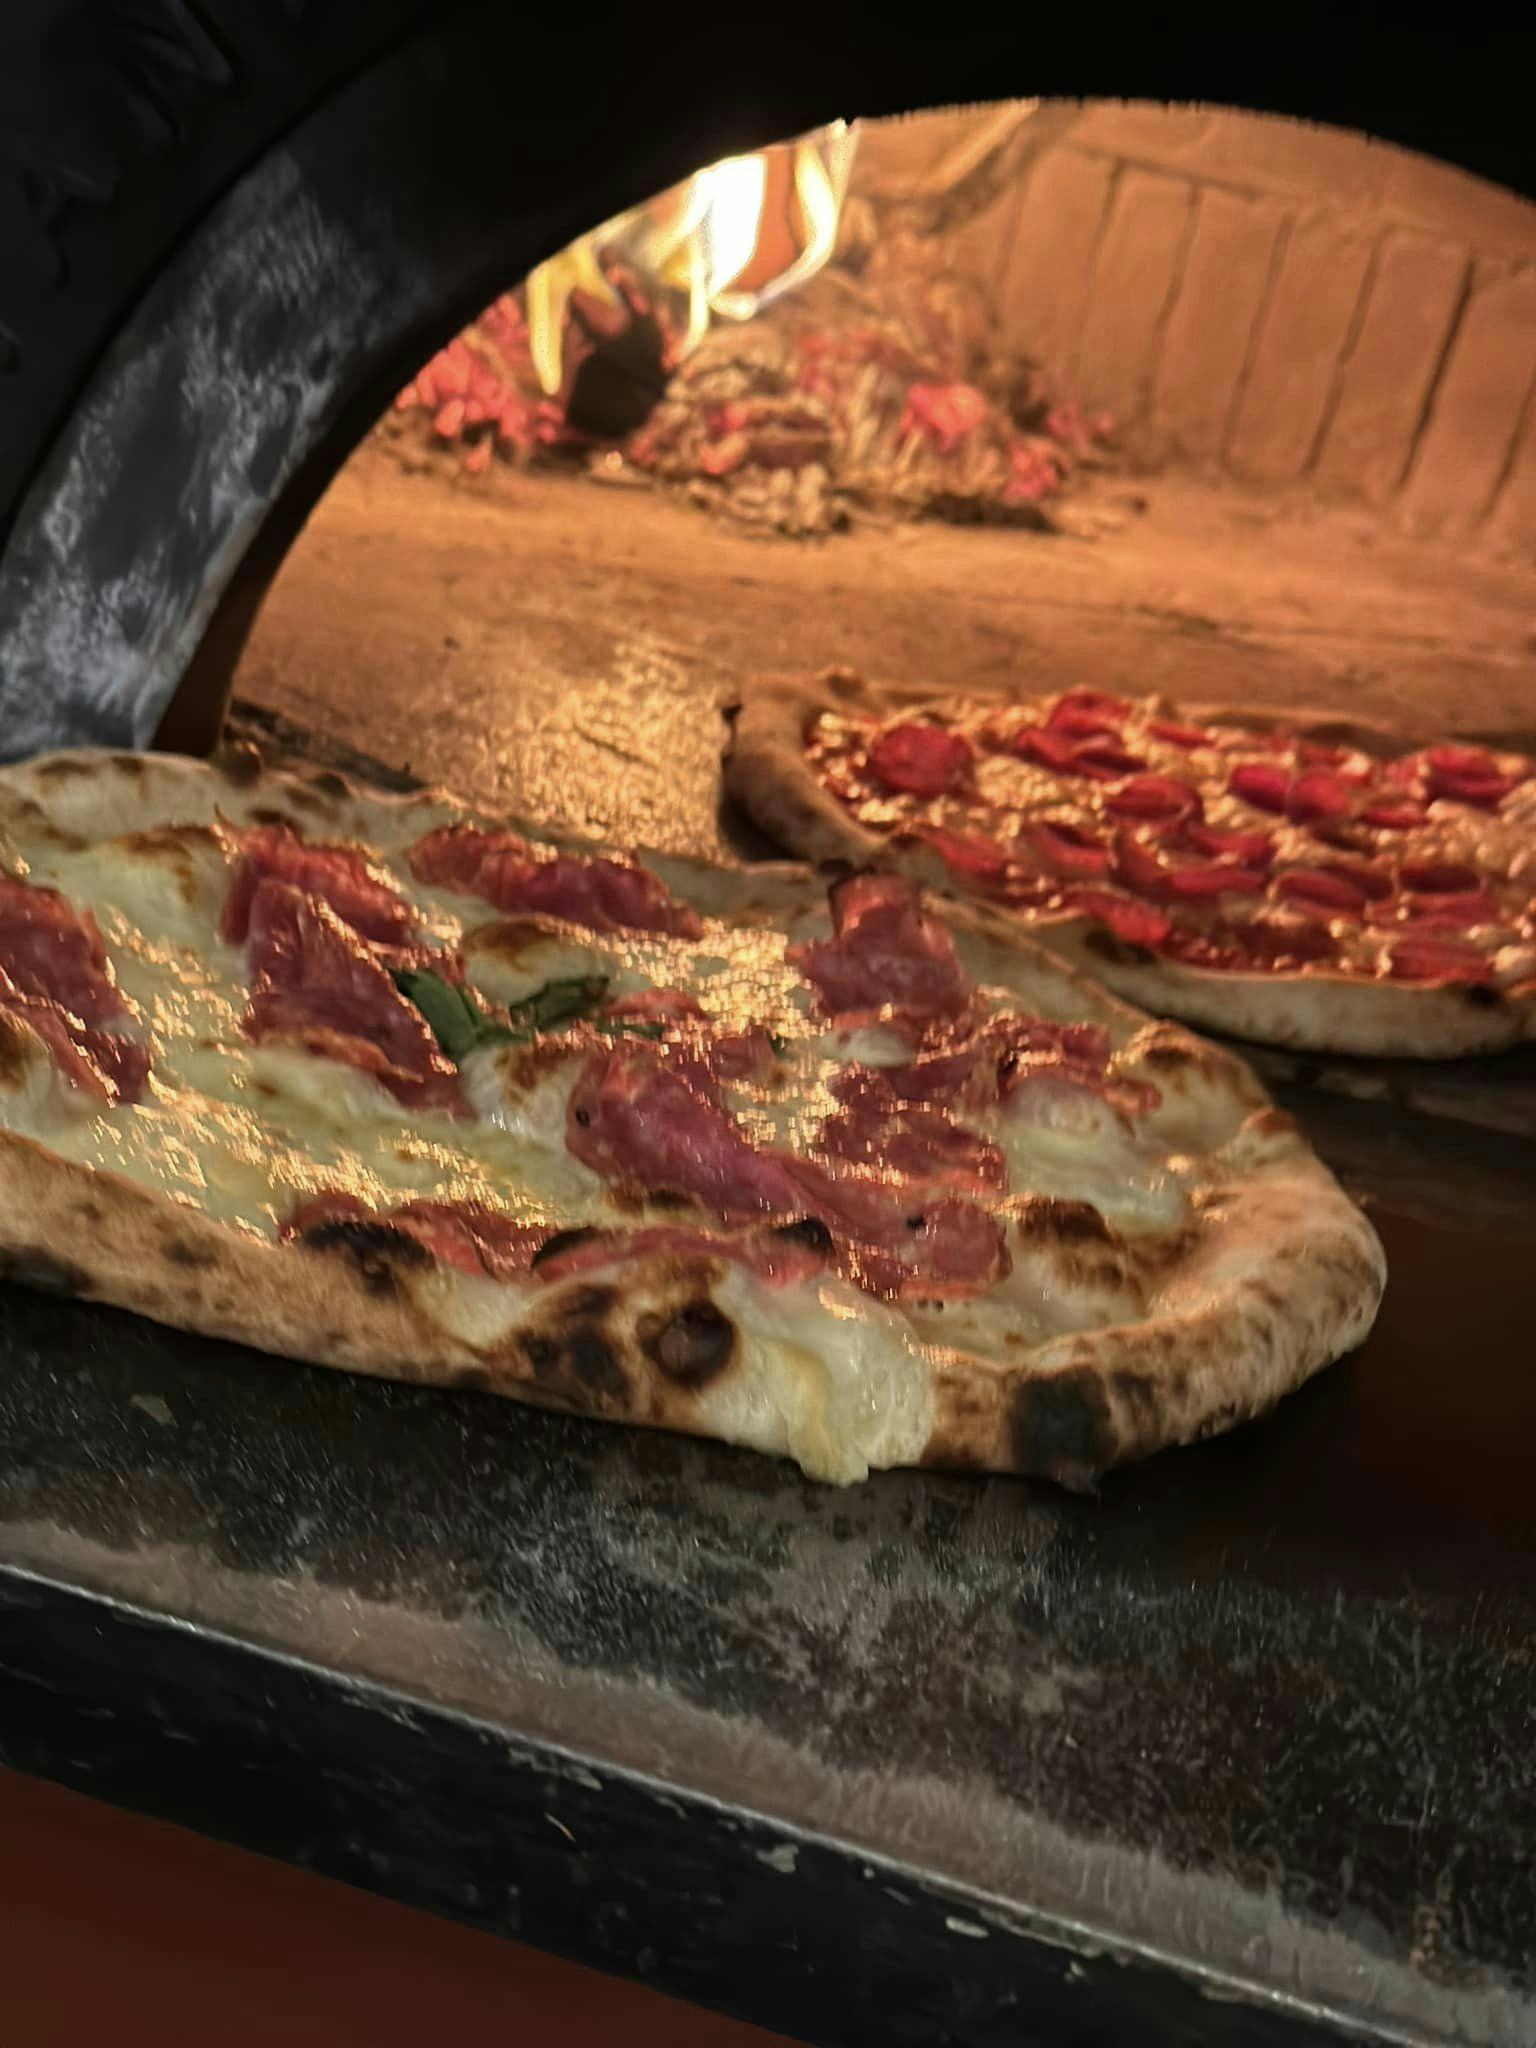 Wood fired pizza at Calogero's Pizzeria in Auburndale, FL